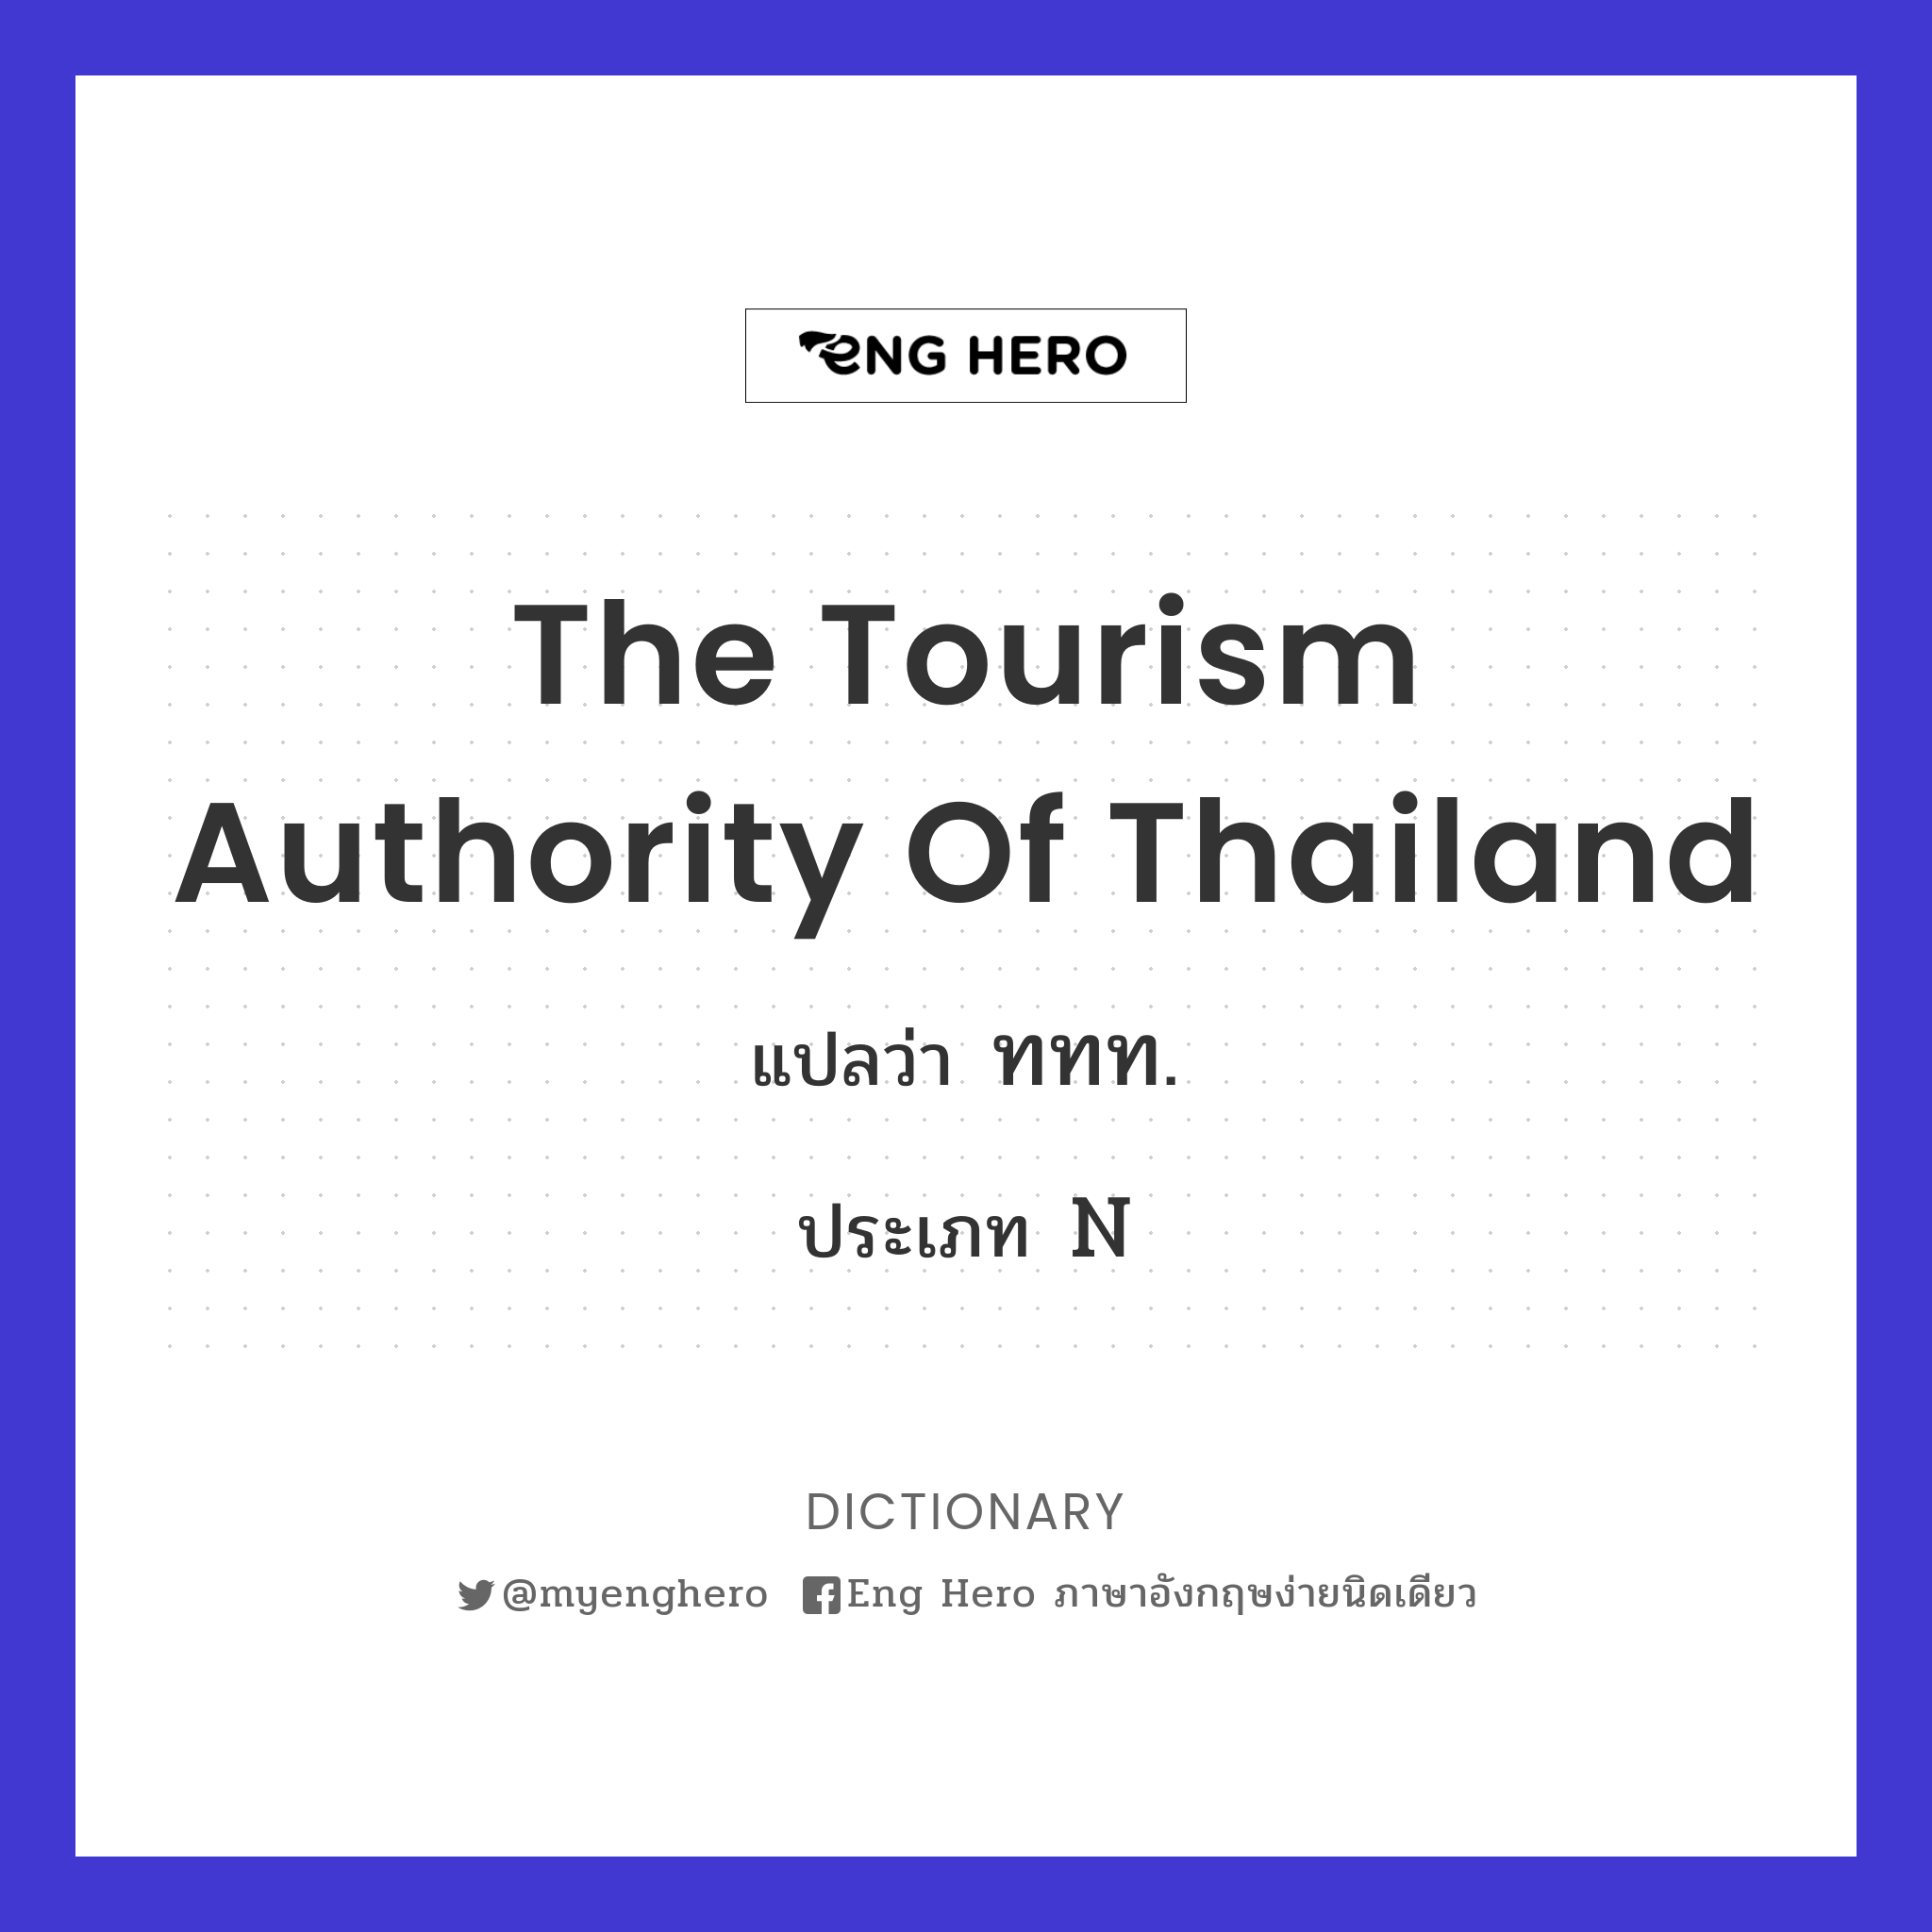 The Tourism Authority of Thailand